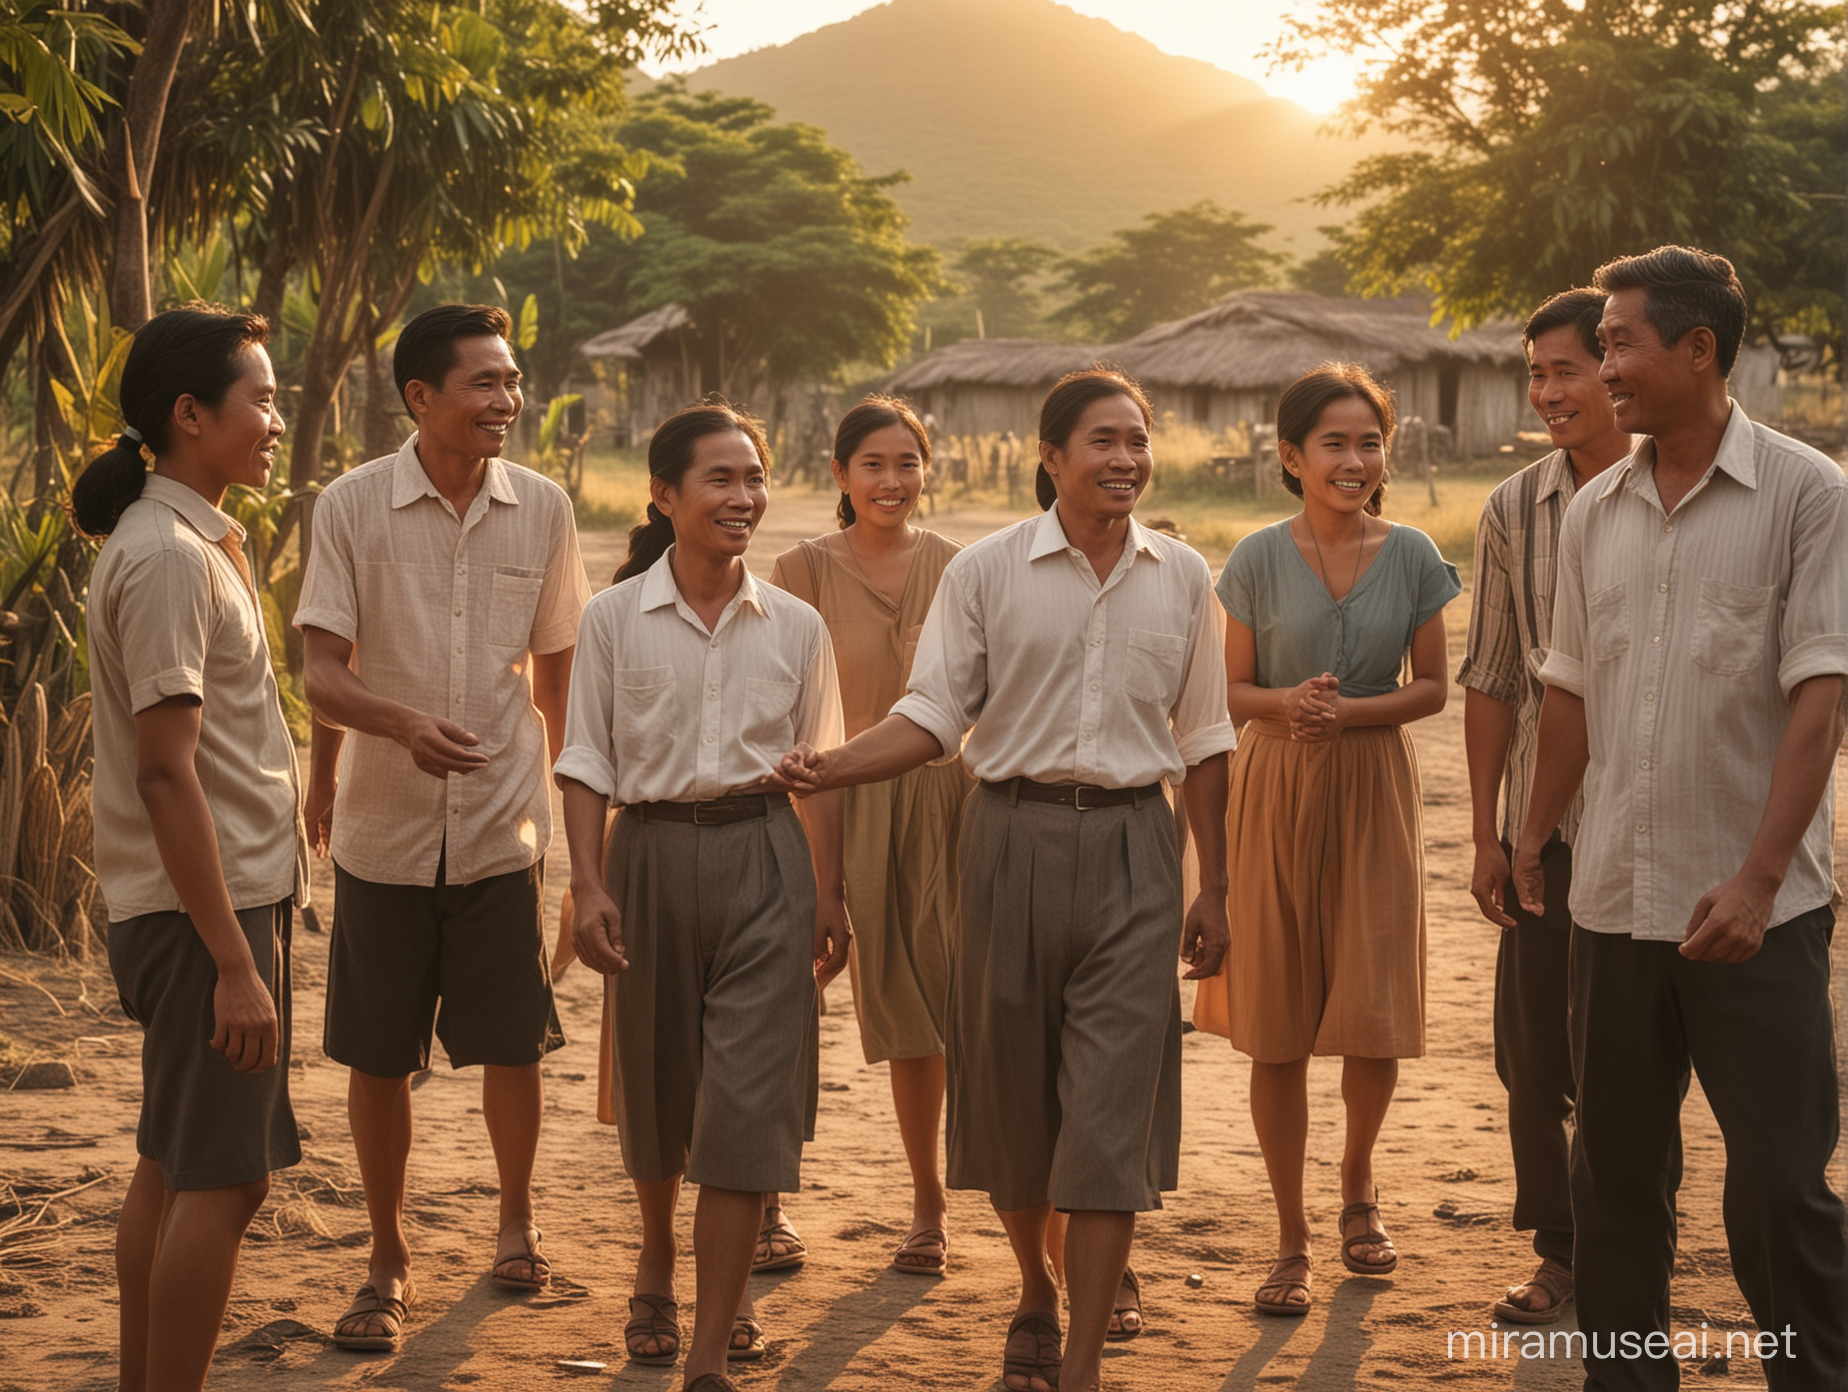 A group of matured Filipino rural villagers led by a powerful male leader, warmly welcoming a young Filipina visitor, the sun was setting, the era was 1950s Philippines, dark cinematic